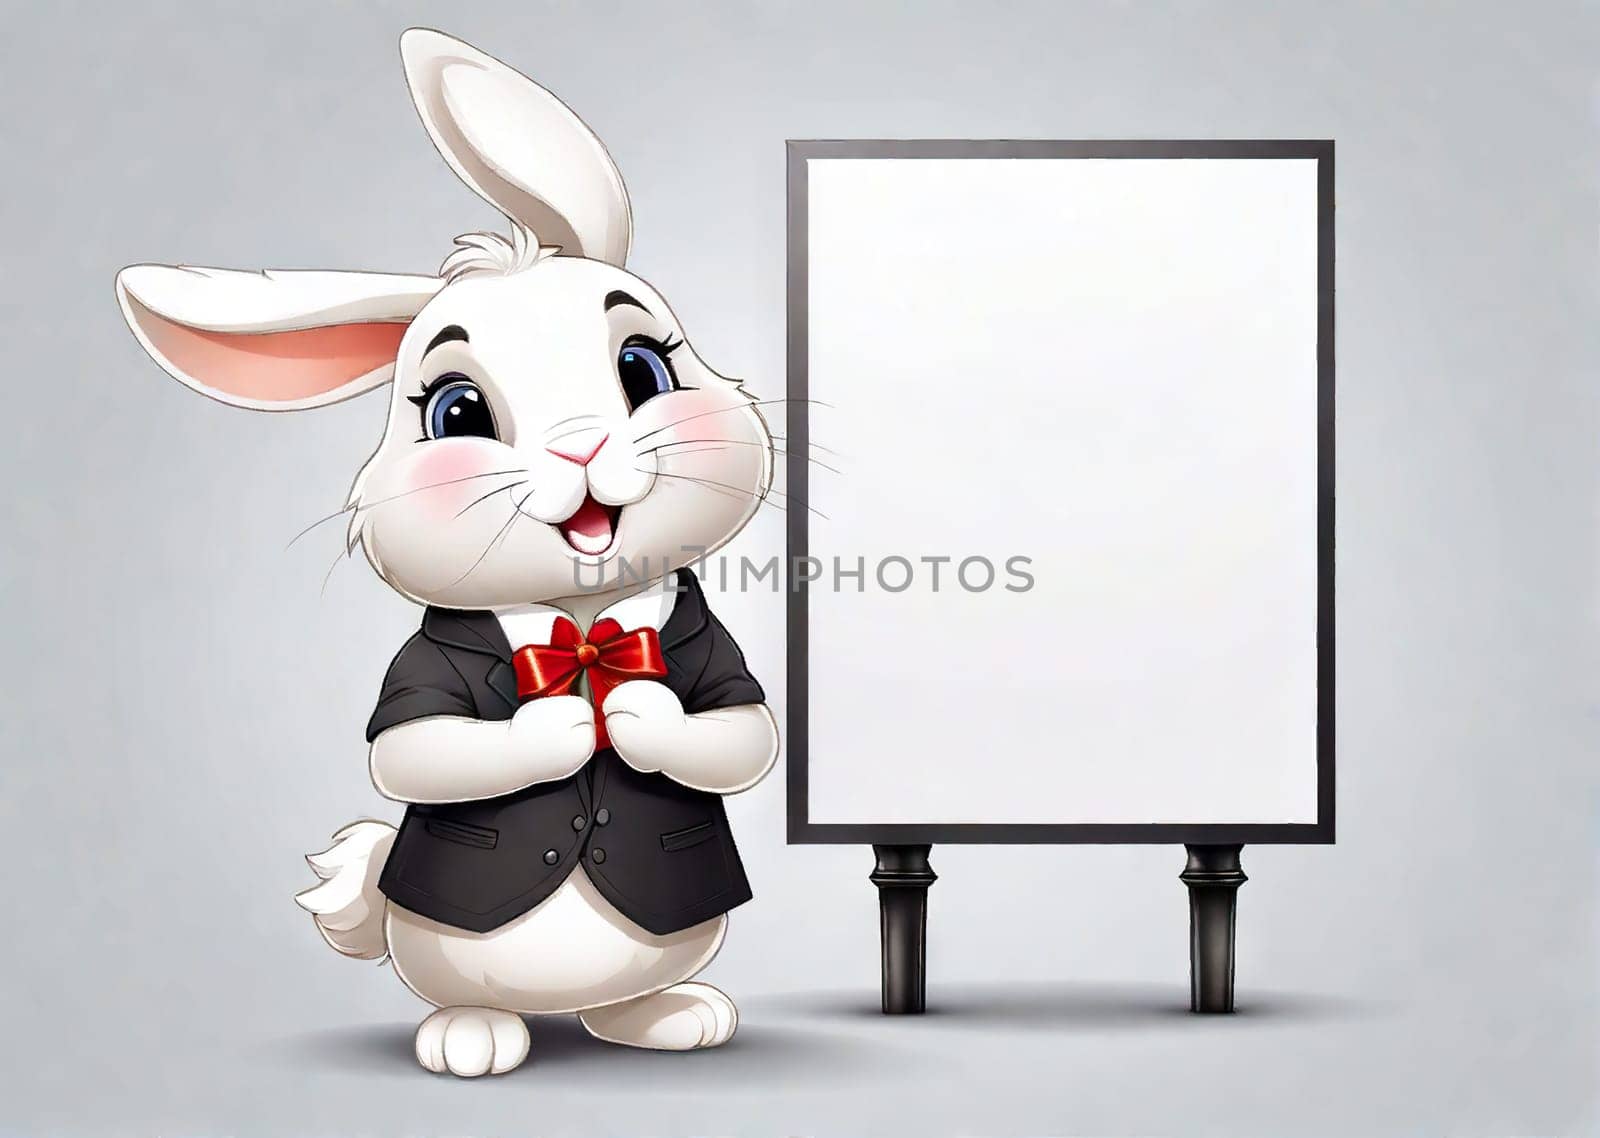 Rabbit holding a blank banner design for your mock up text